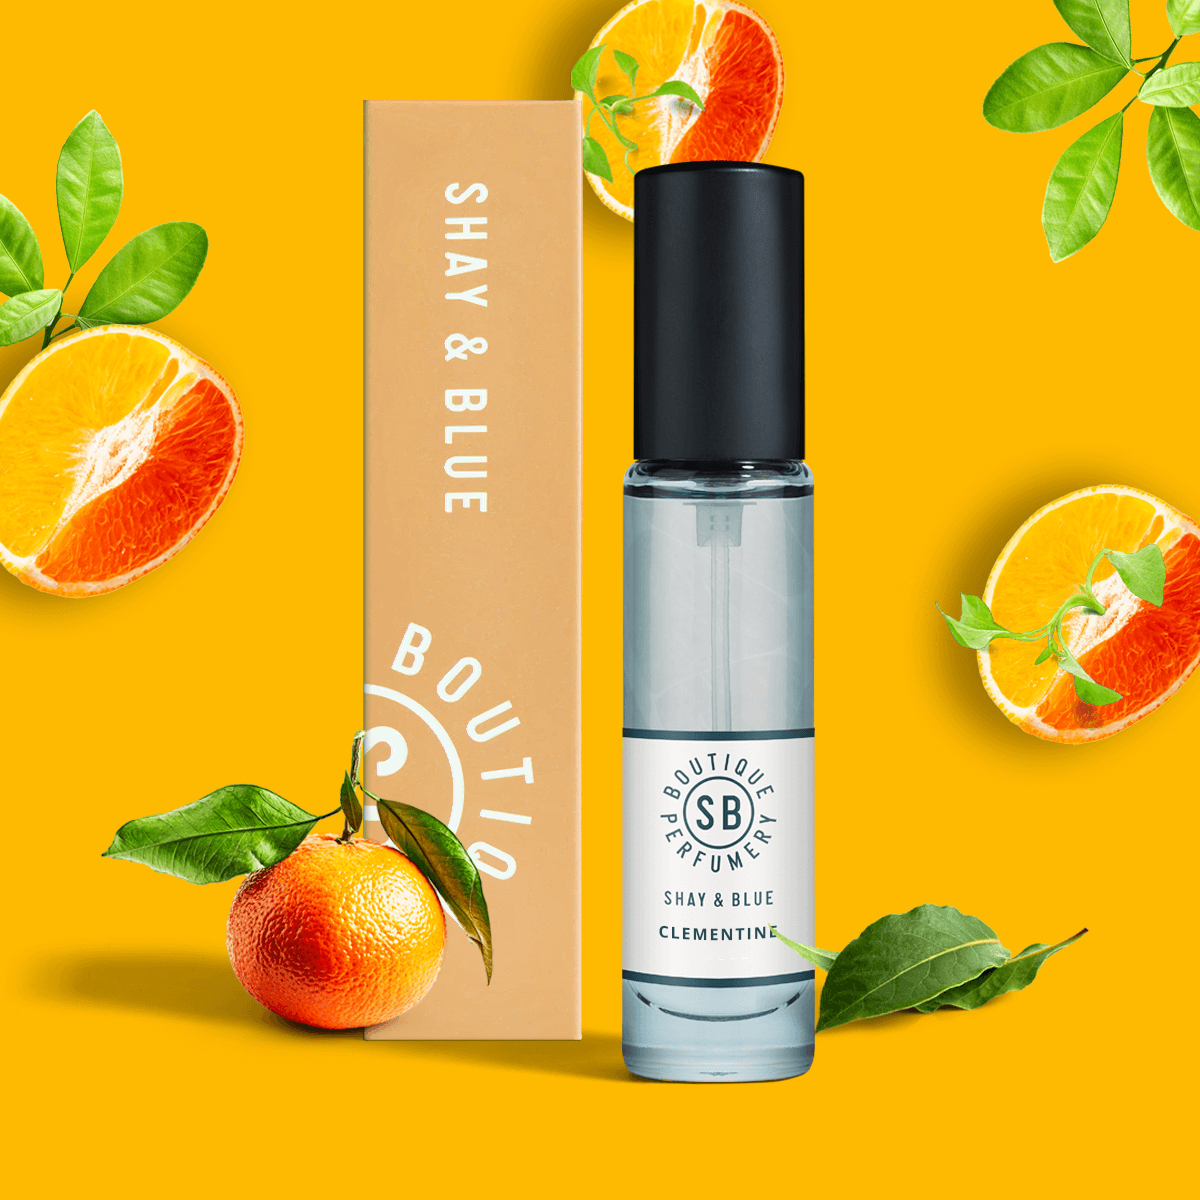 Clementine Fragrance 10ml | Flirty clementine with a bitter freshness of petitgrain and deep laurel woods. | Clean All Gender Fragrance | Shay & Blue